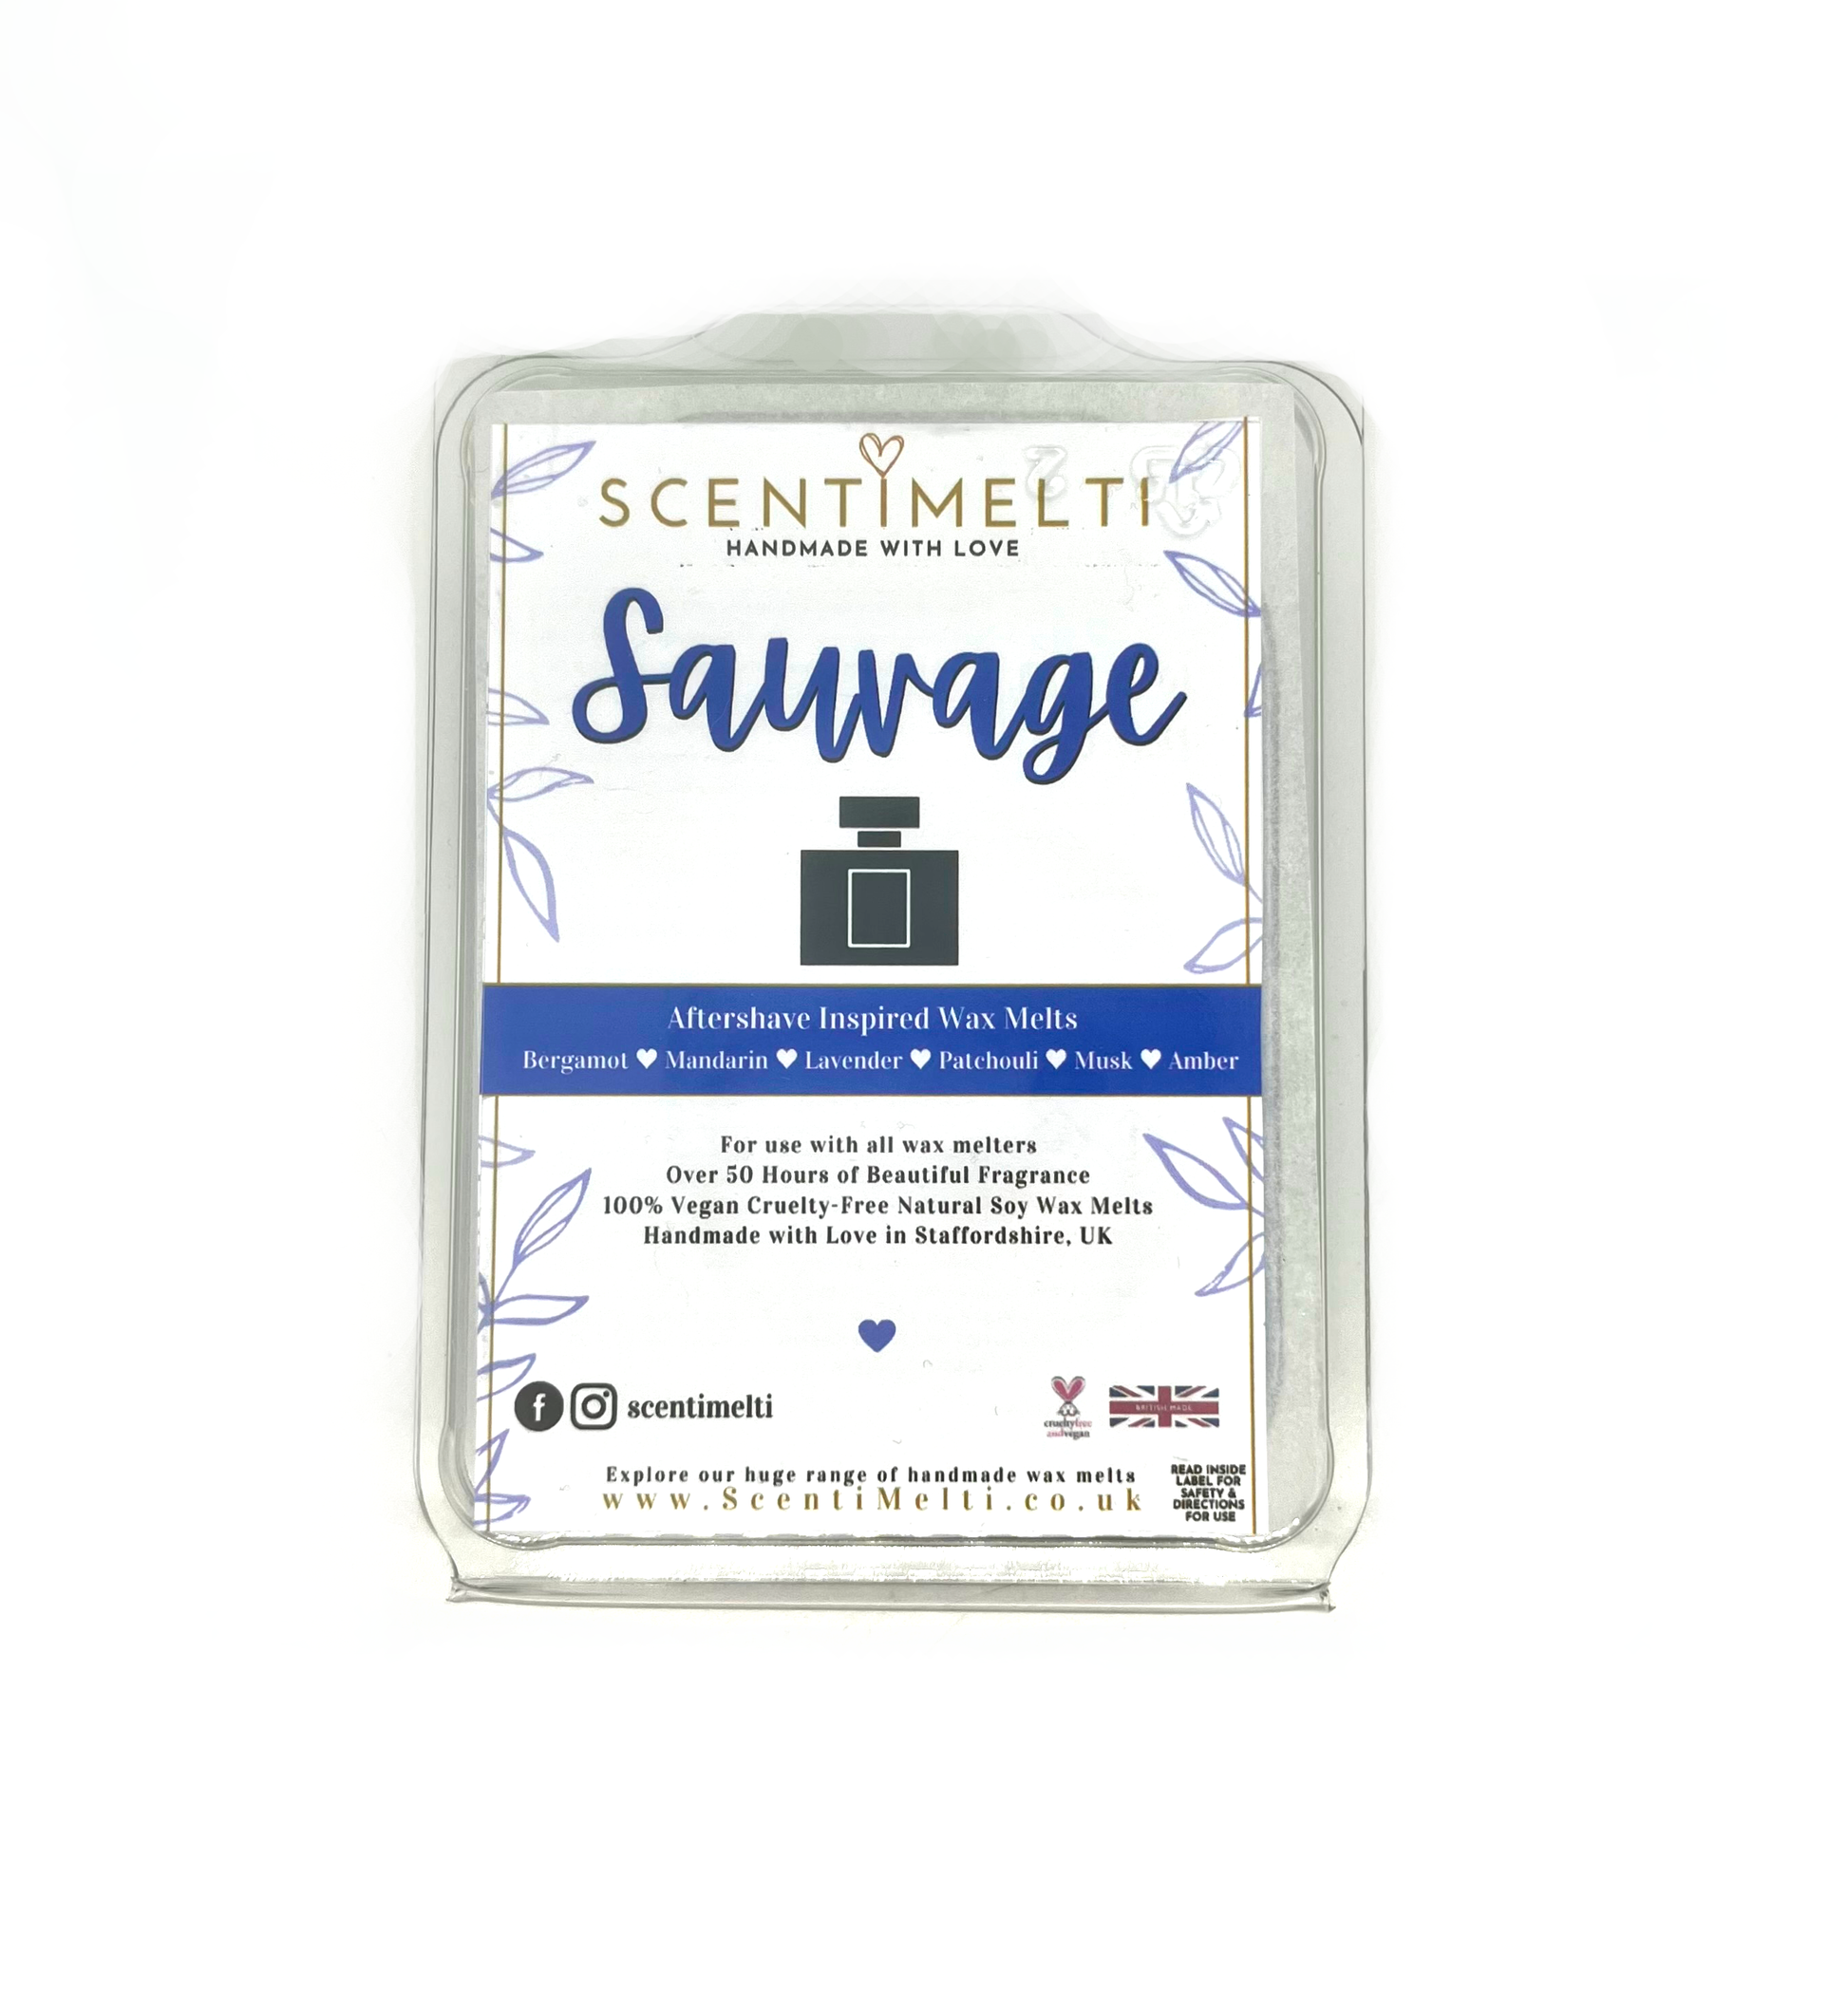 Sauvage Heart Clamshell Wax Melts - ScentiMelti  Sauvage Heart Clamshell Wax Melts